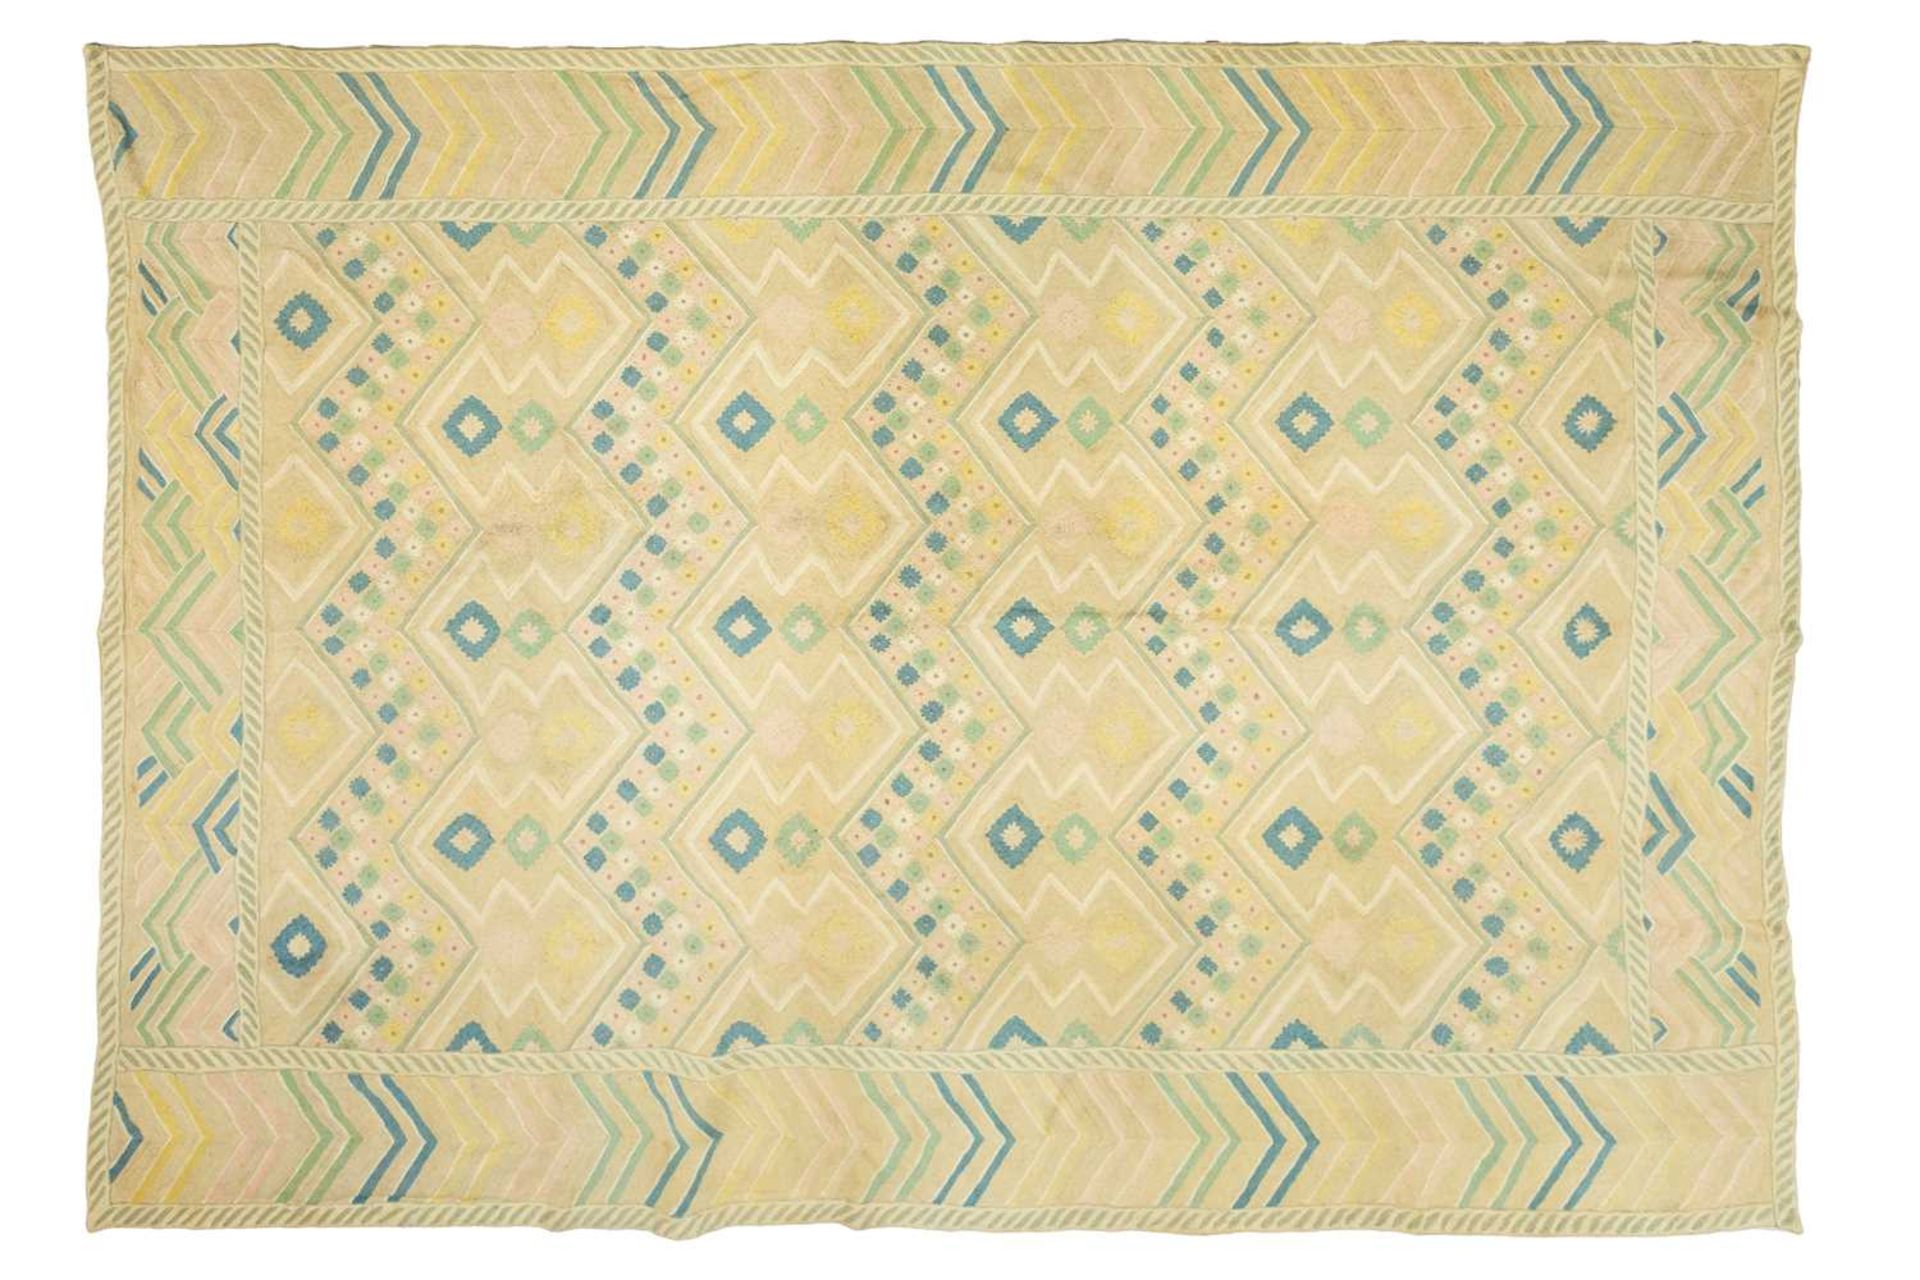 A large 'Mid-Century Vintage' style needlework rug in geometric patterns with muted tones of ochre